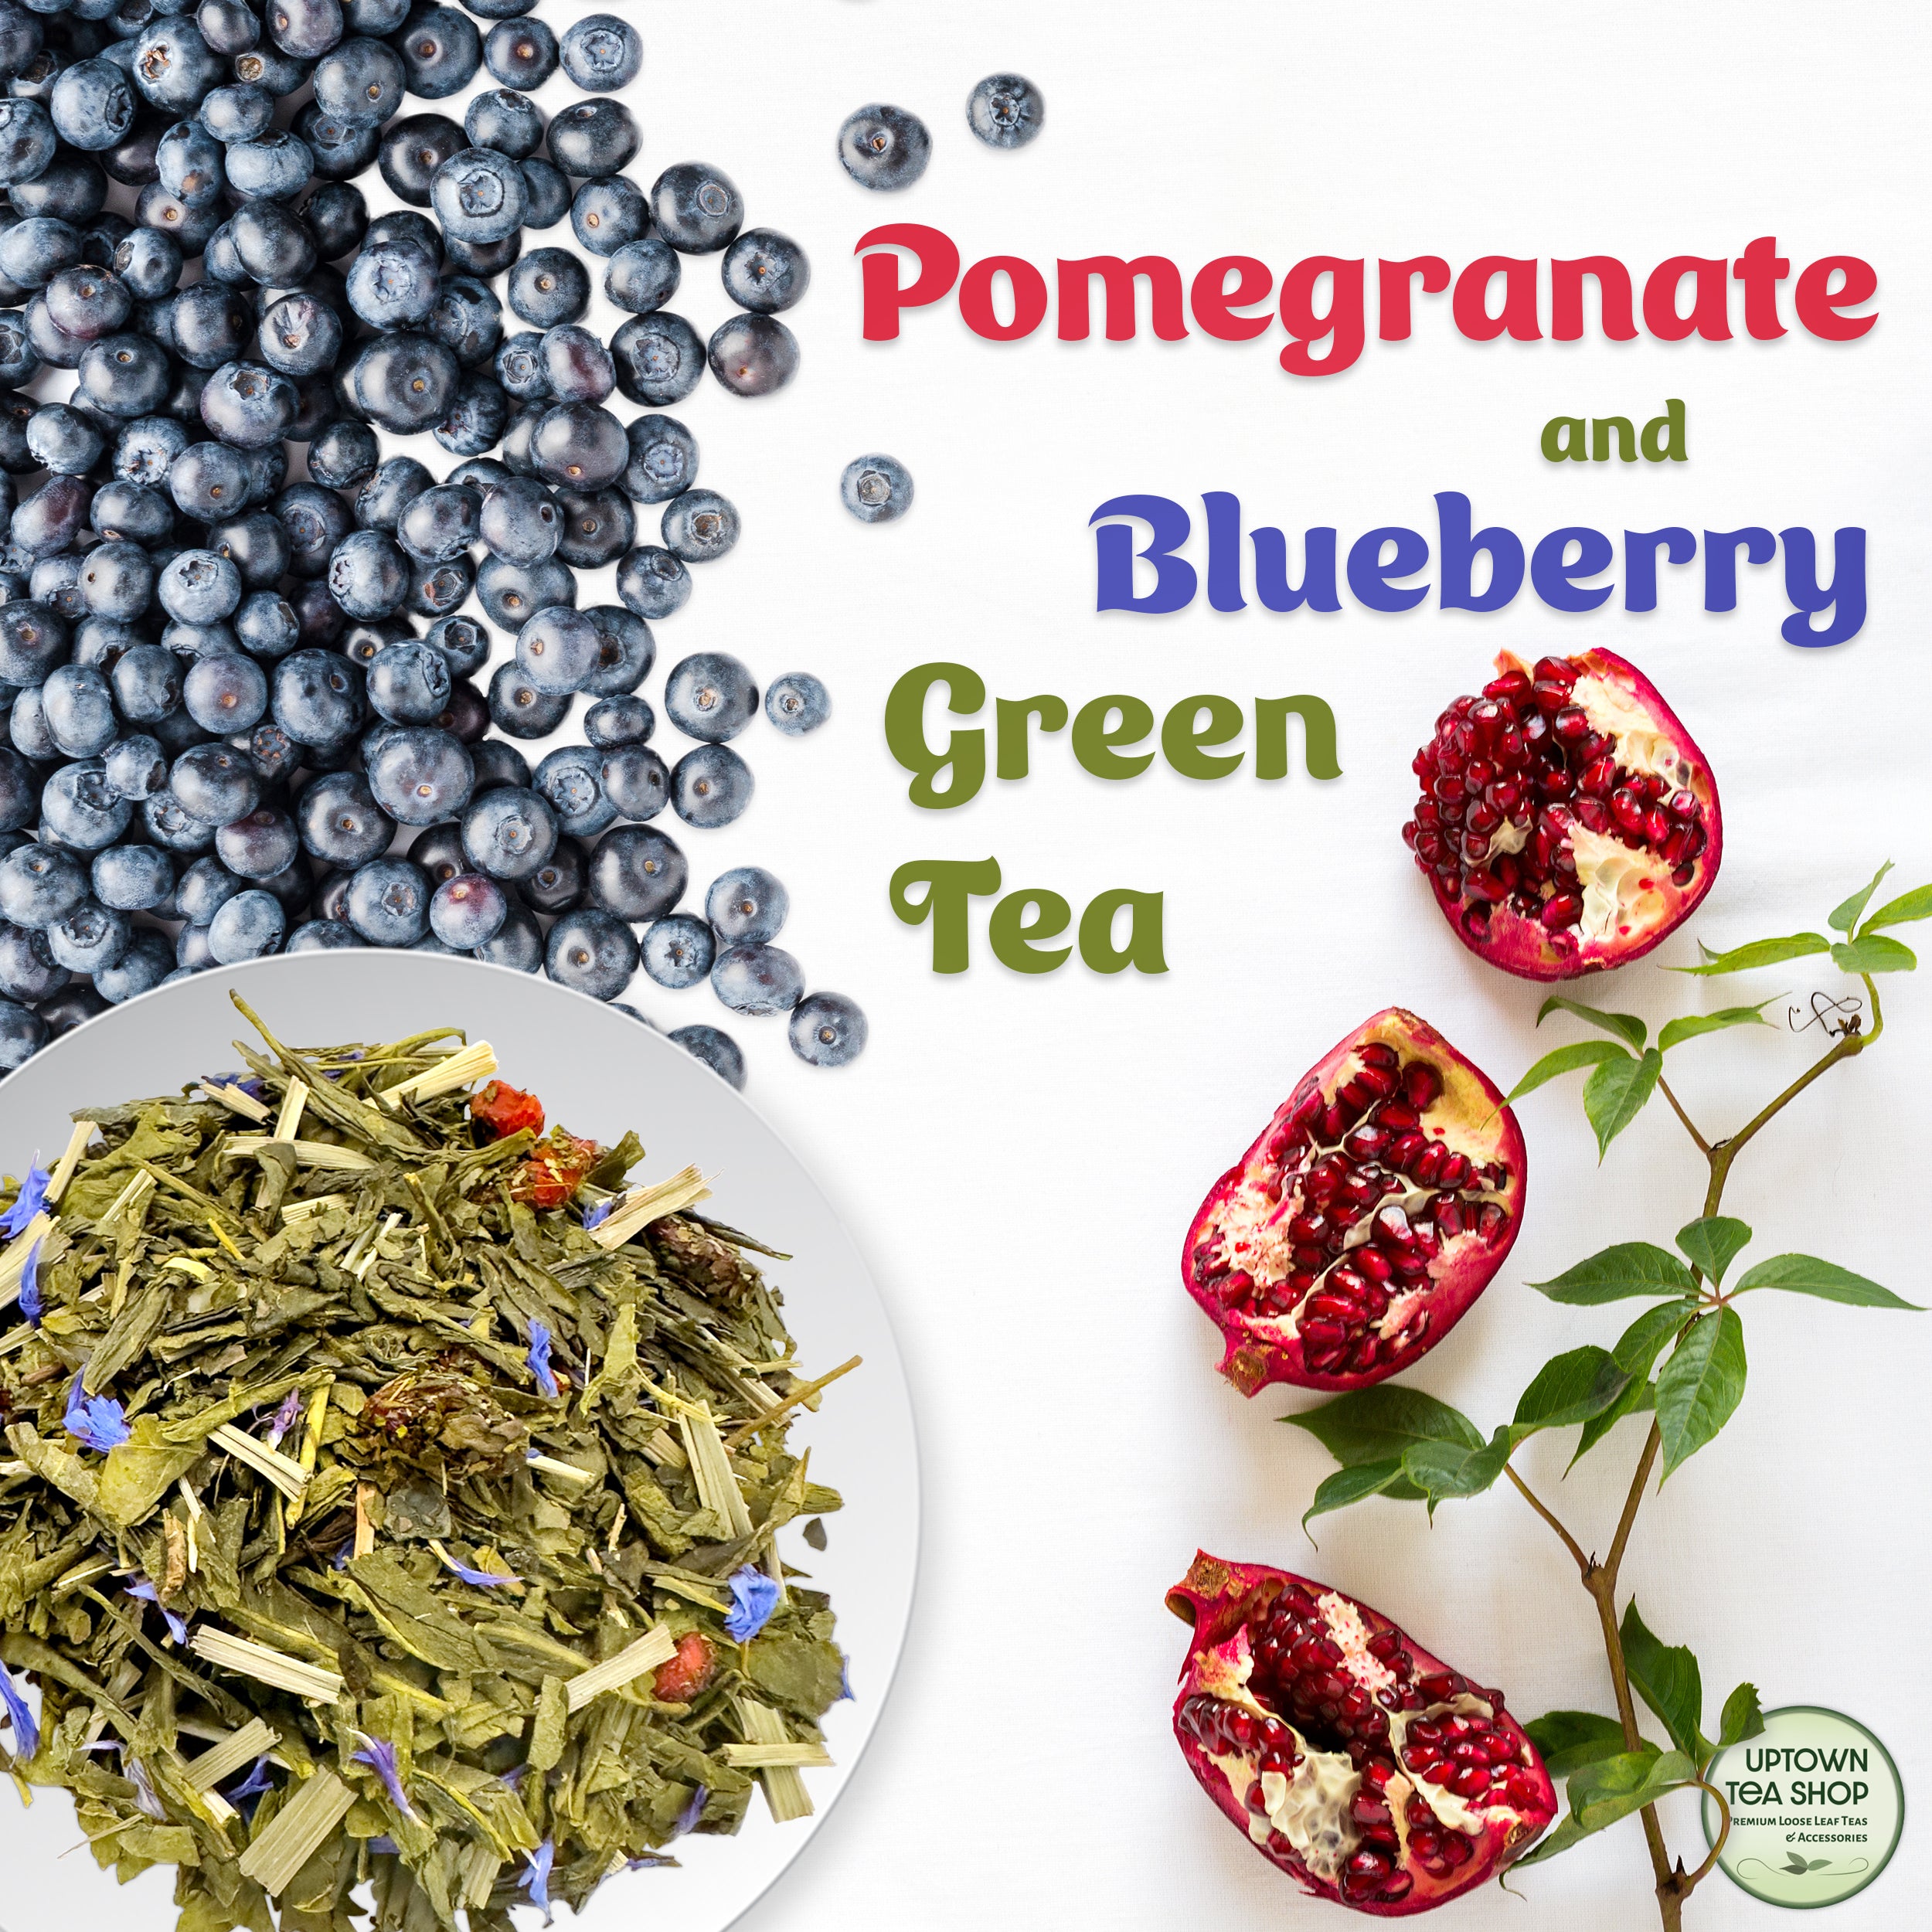 Pomegranate and Blueberry Green Tea